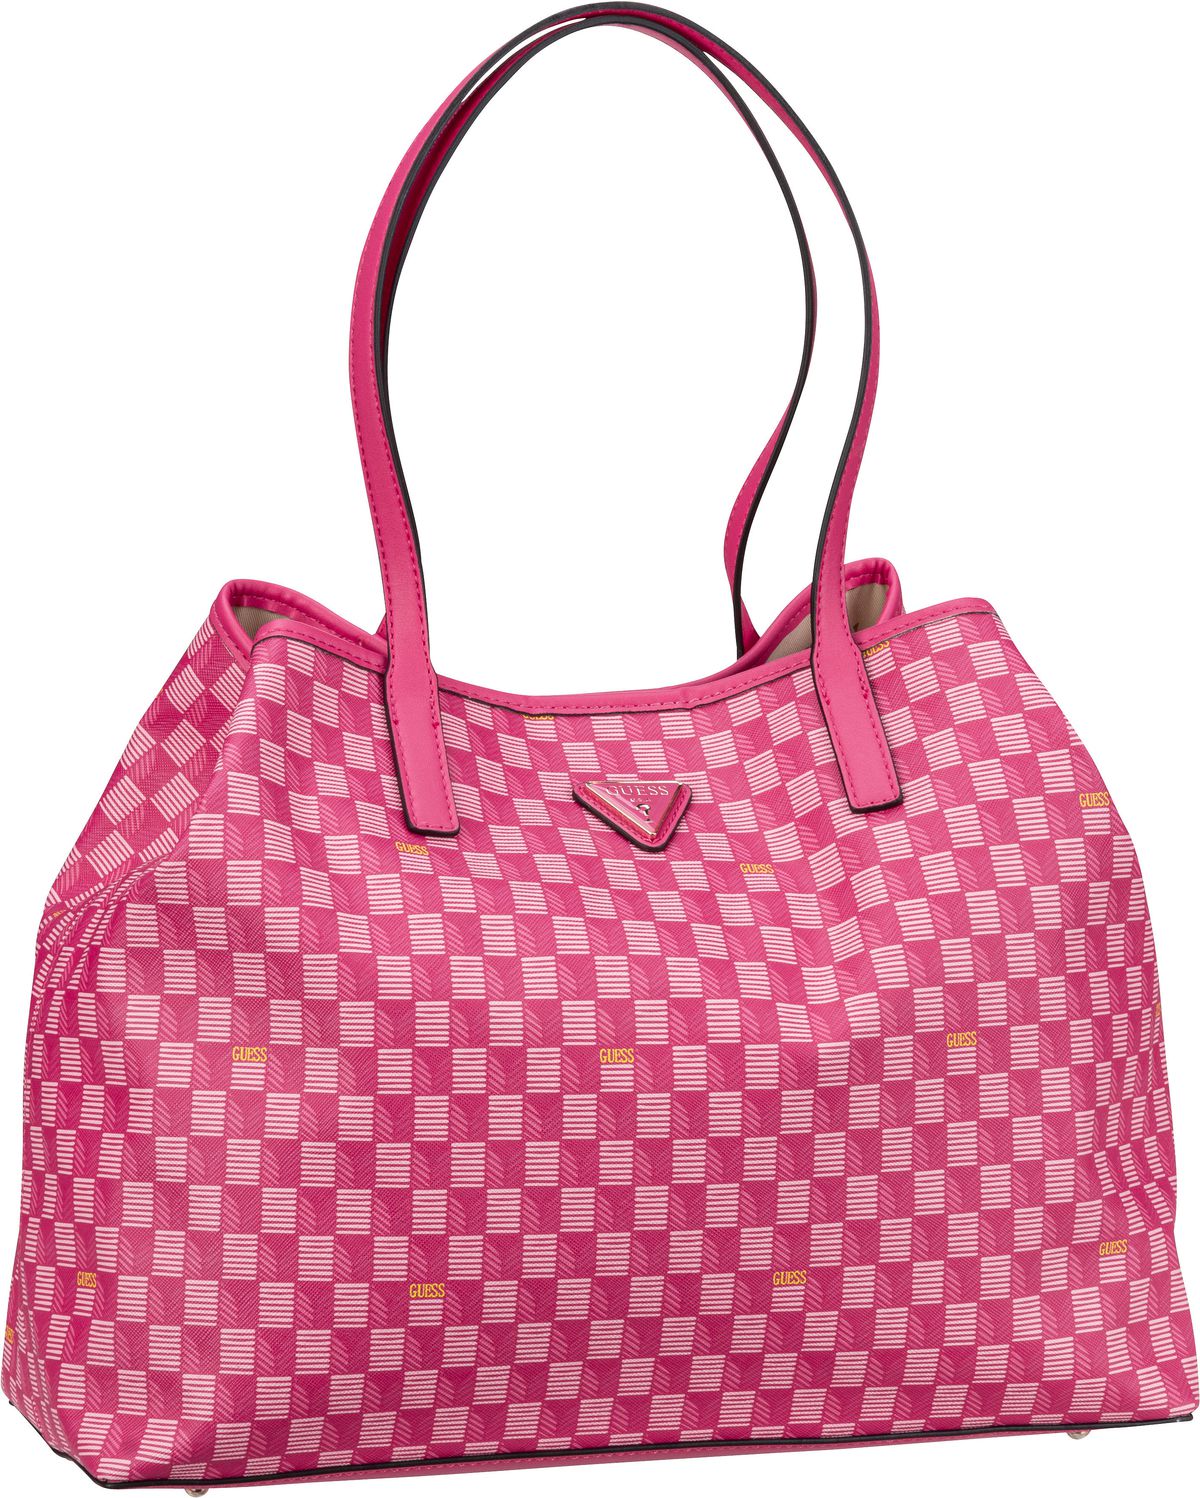 Guess Guess Vikky JT Large Tote in Pink (23 Liter), Shopper